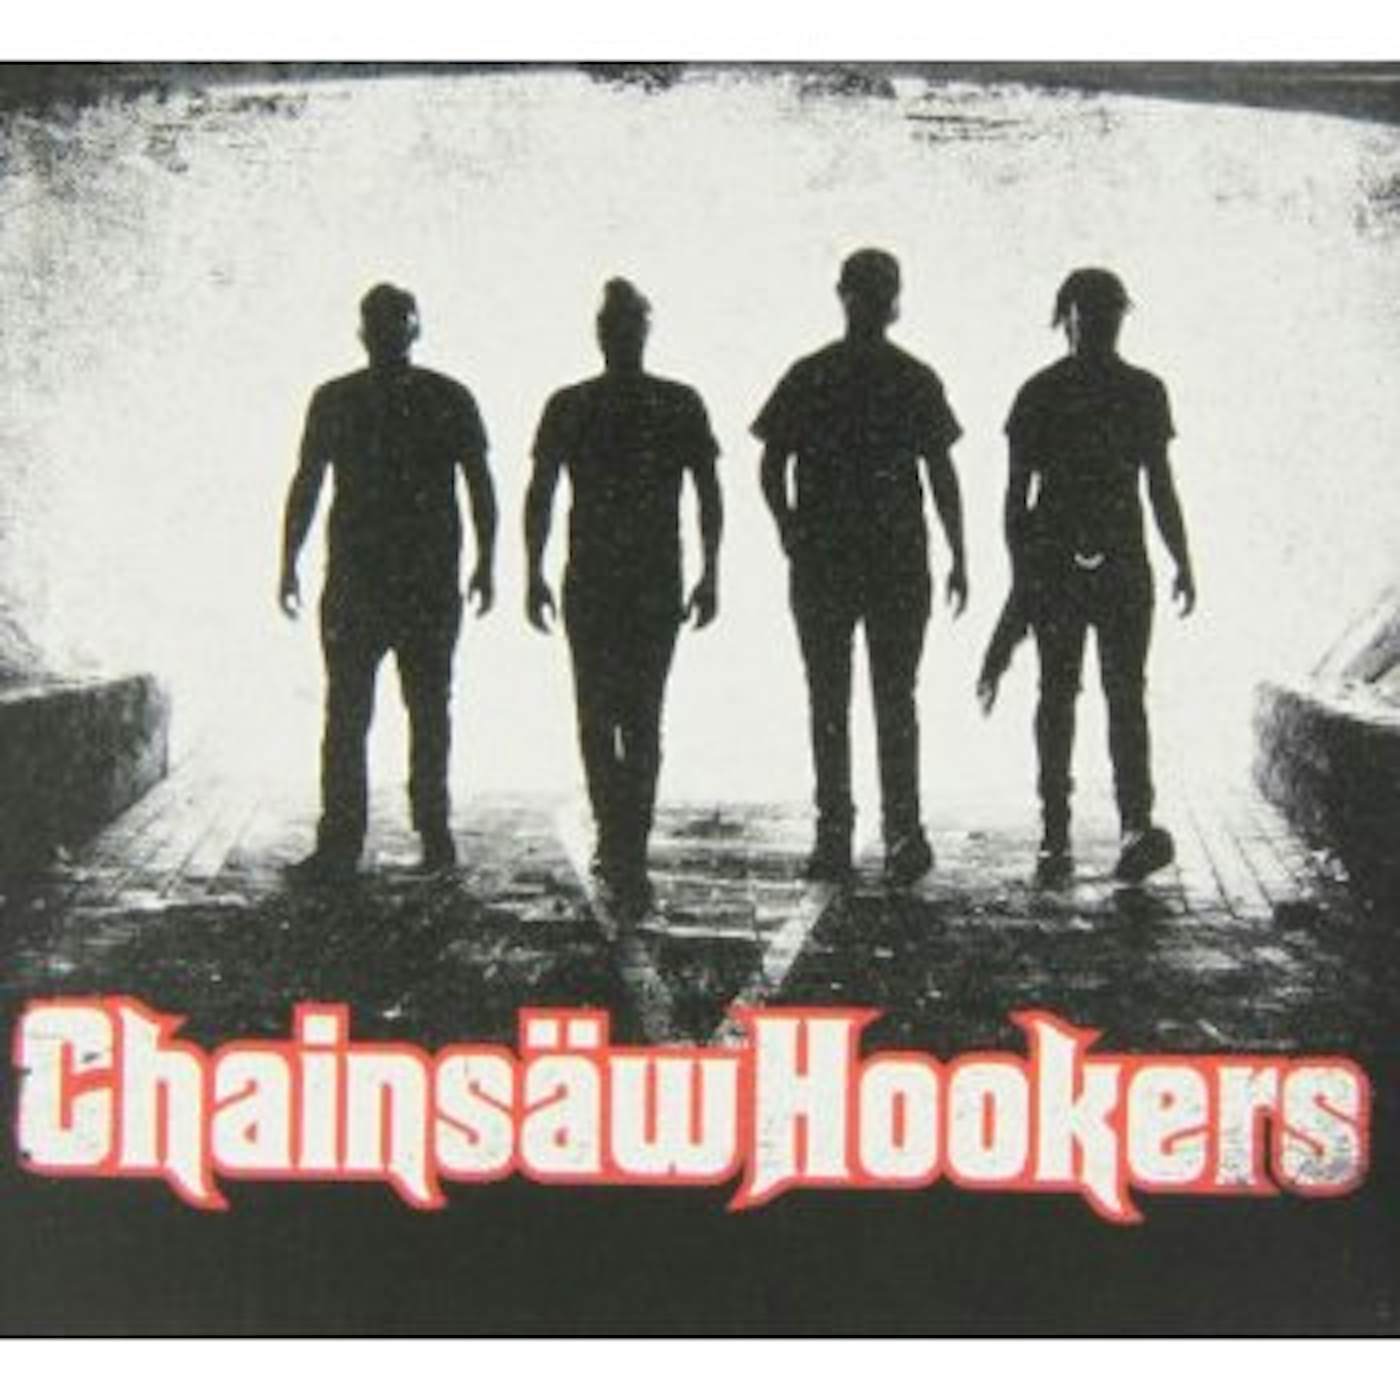 CHAINSAW HOOKERS CD